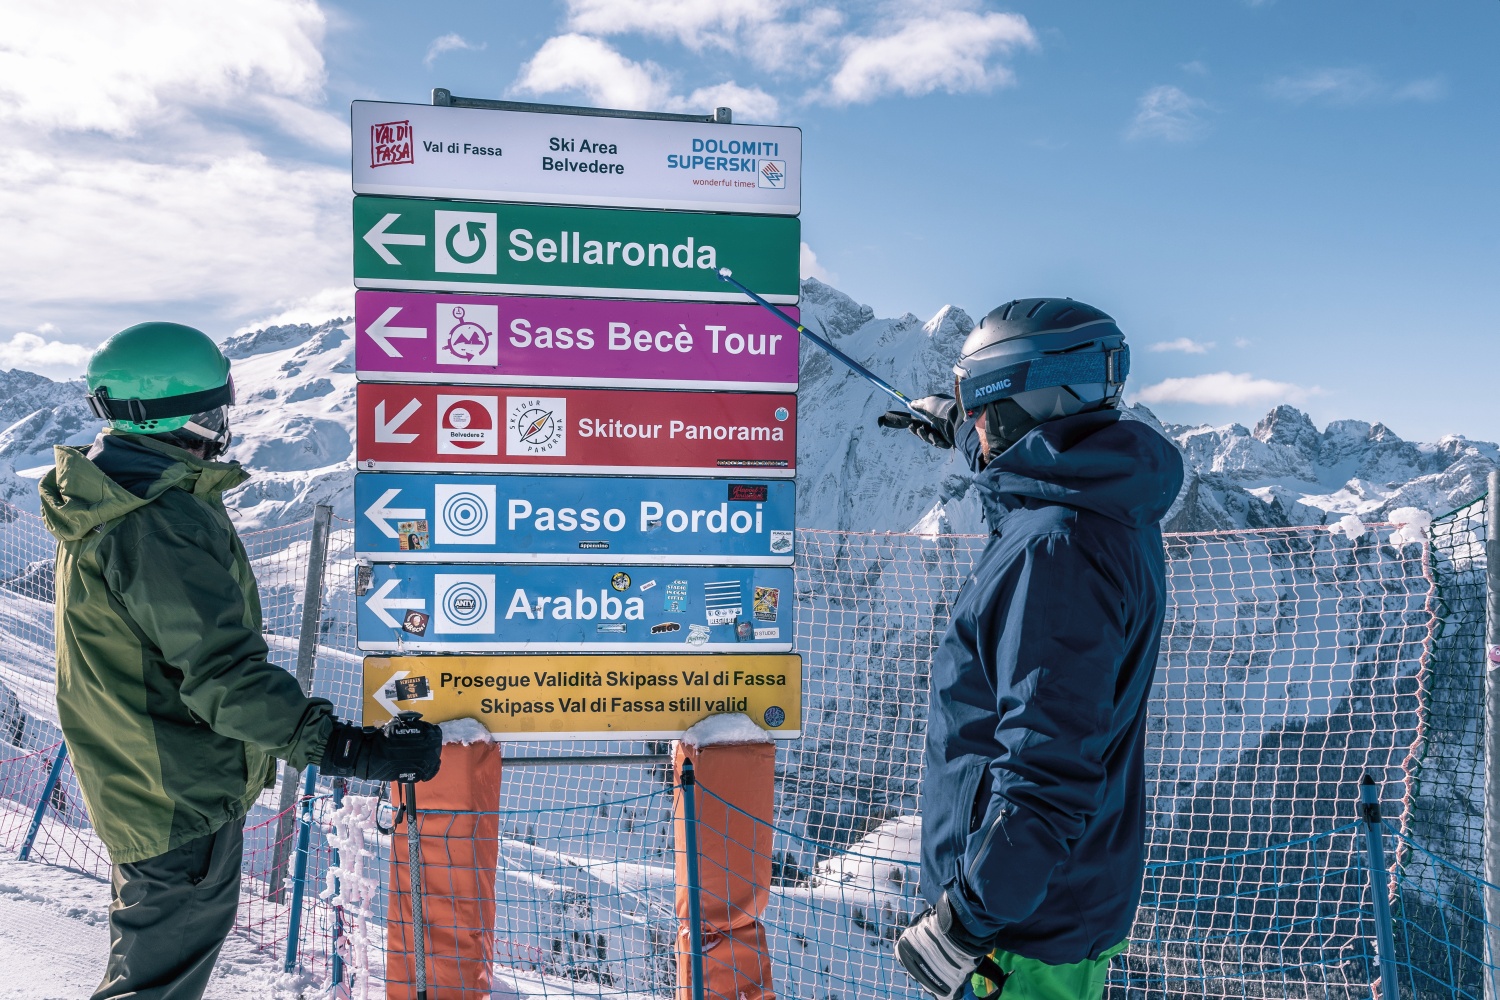 Skiers looking at sign for Ski Area Belvedere, Val di Fassa